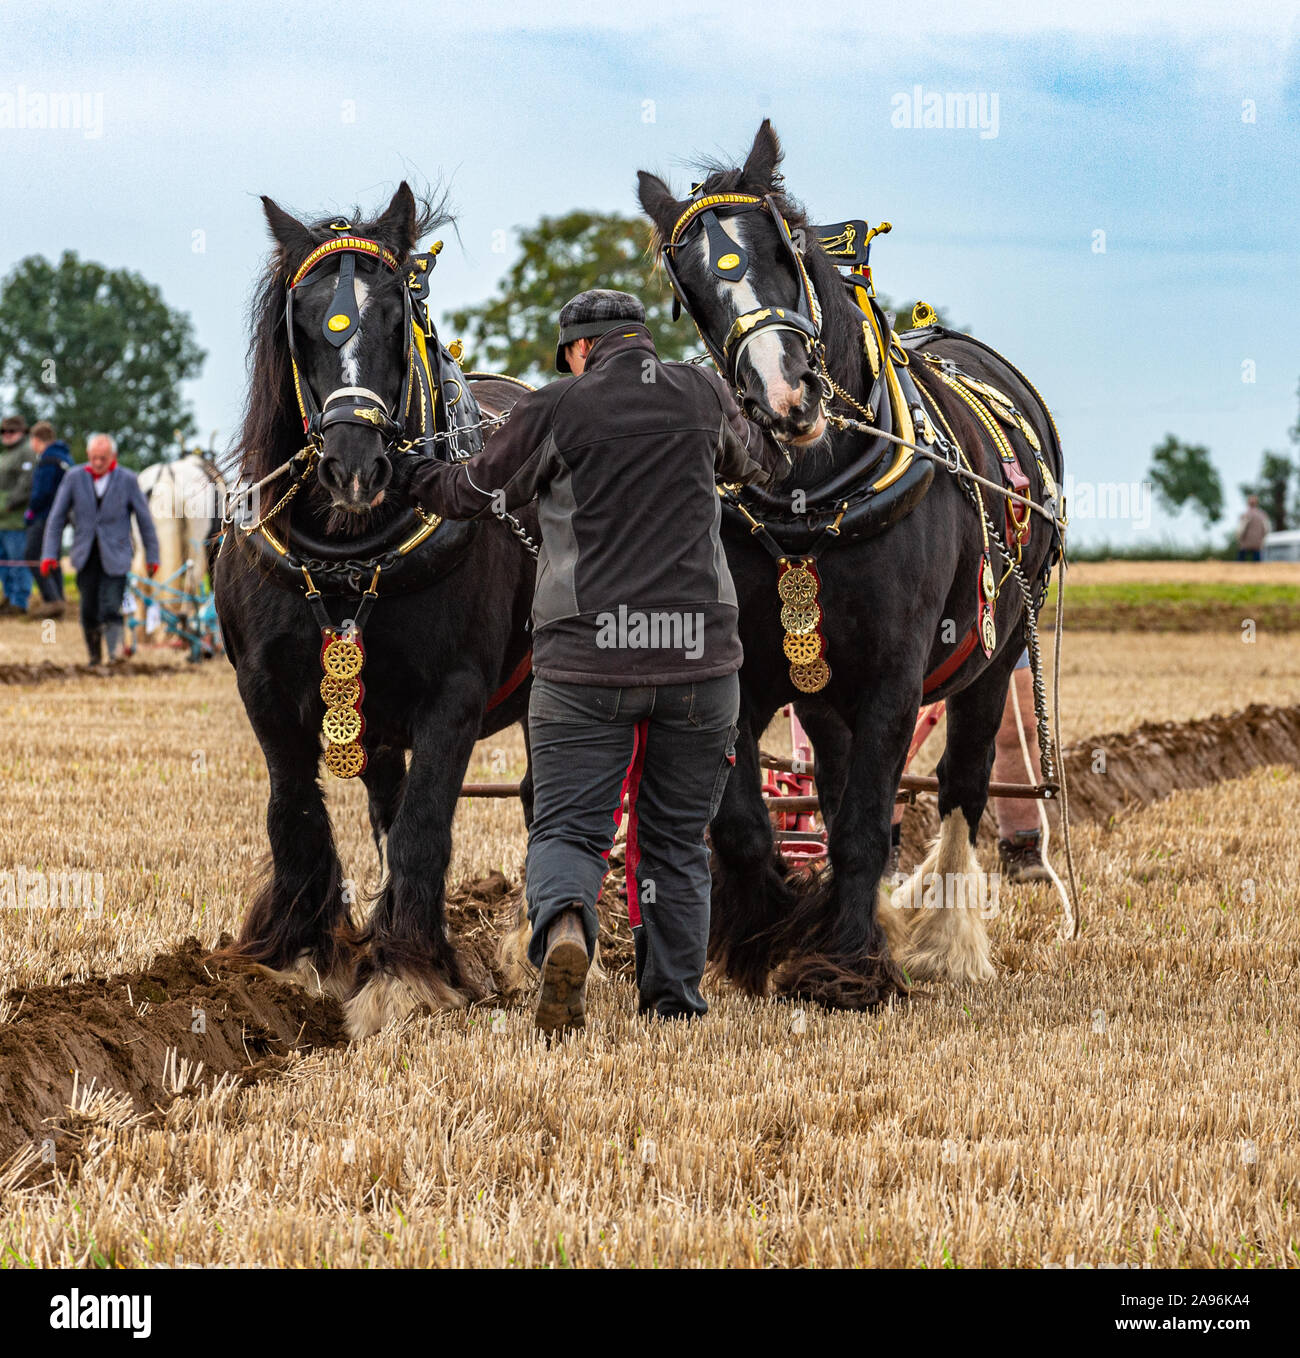 British National Ploughing Championships, Lincoln, UK - Heavy Horses in the ploughing competition Stock Photo